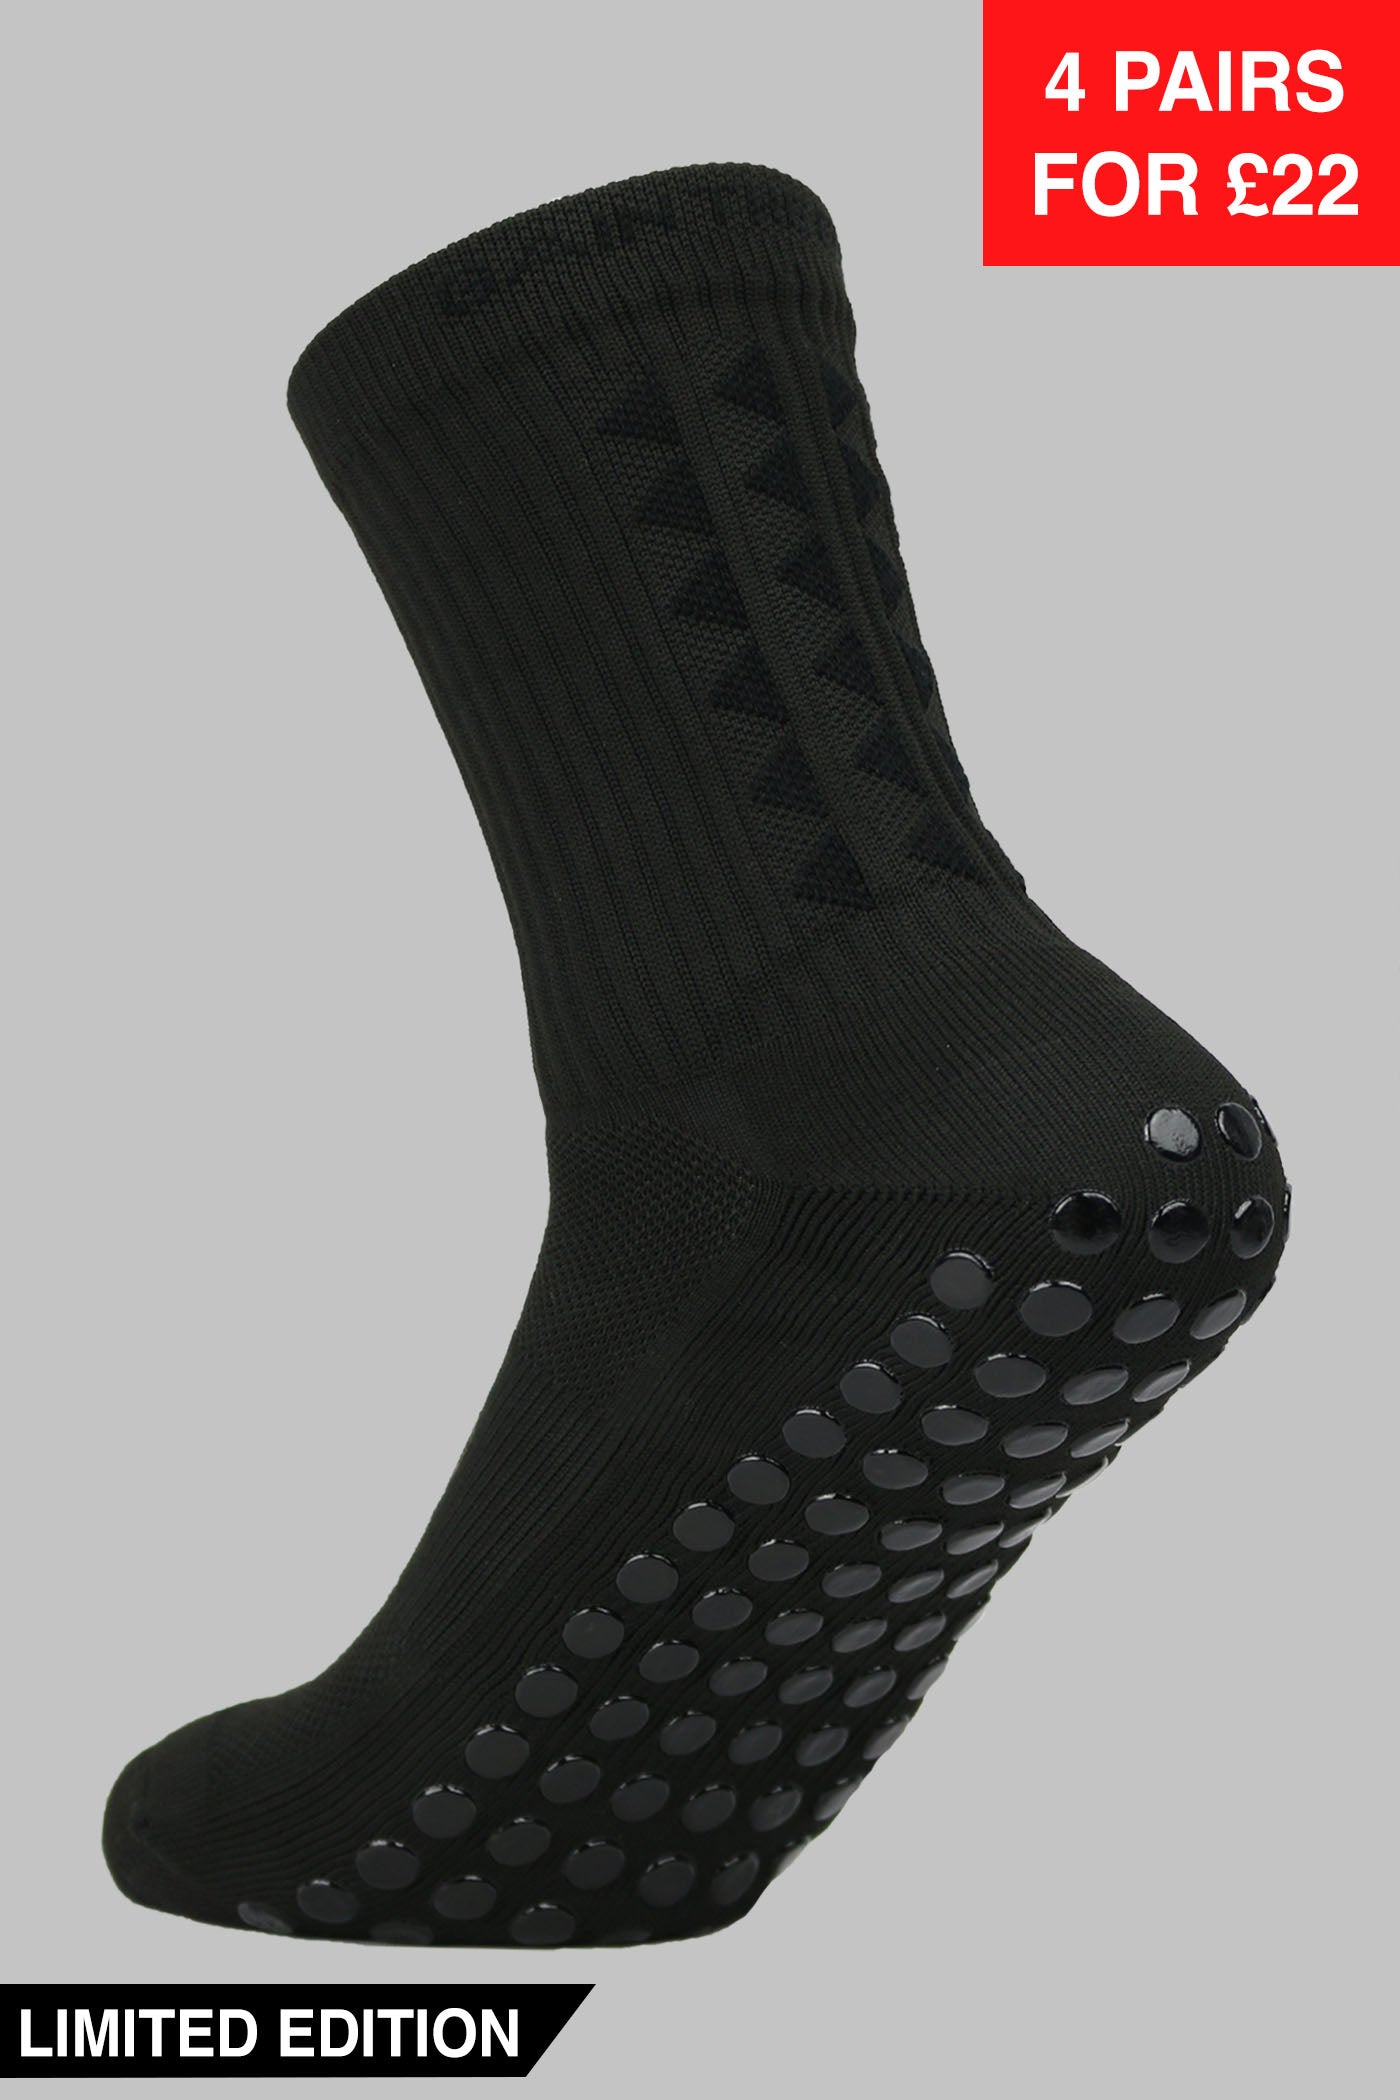 LIMITED EDITION GRIP SOCKS 2.0 - White & Blue